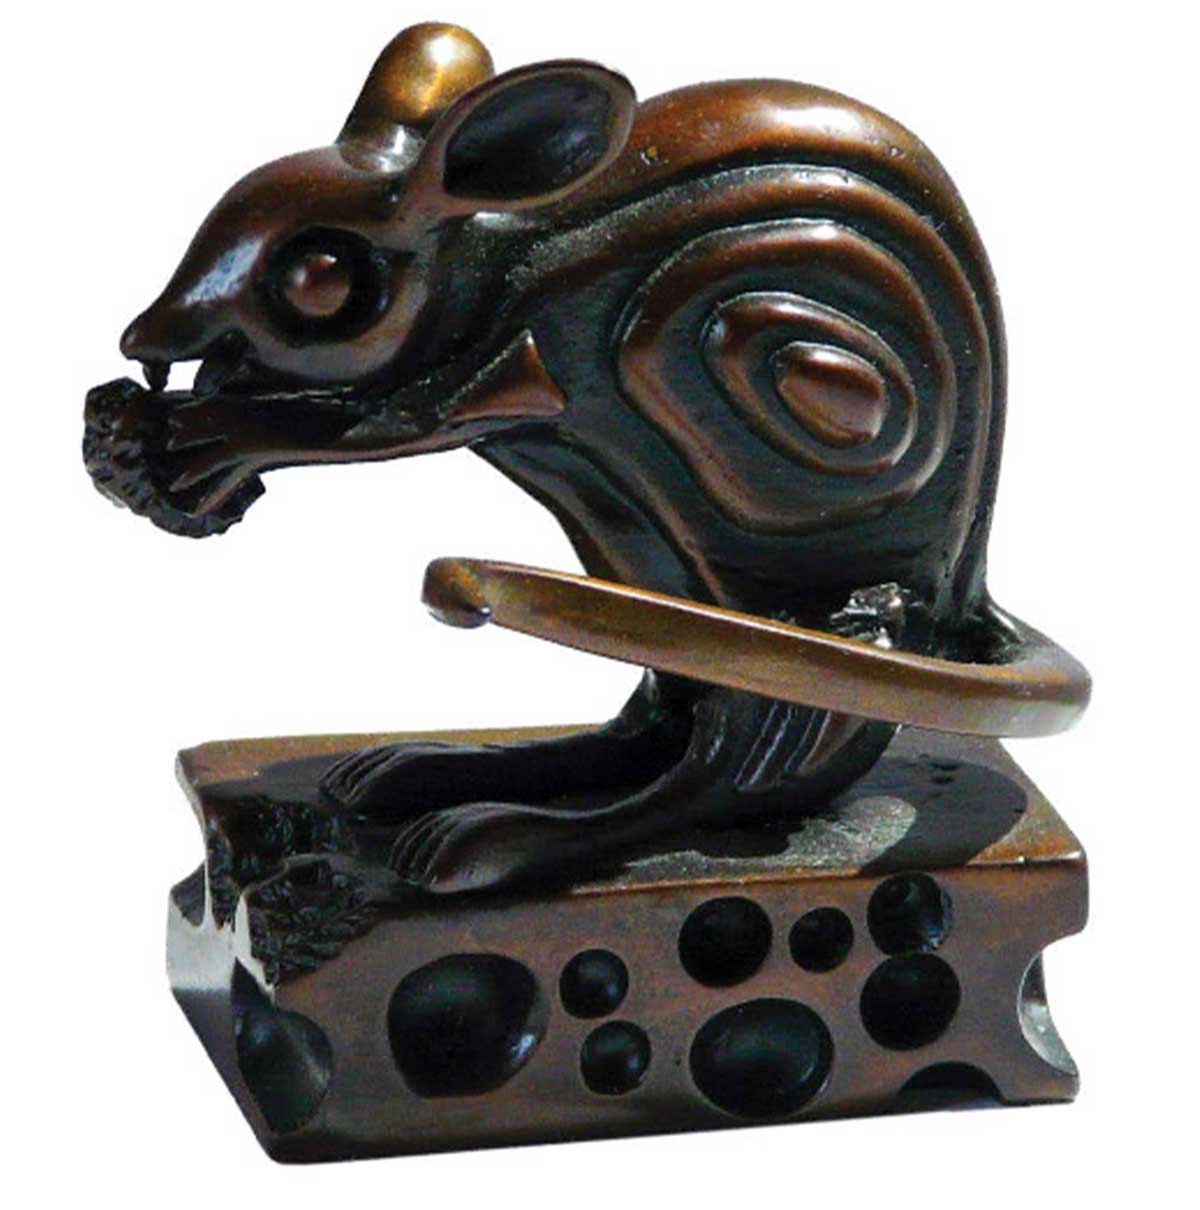 Fiberboard model of the finished bronzed mouse